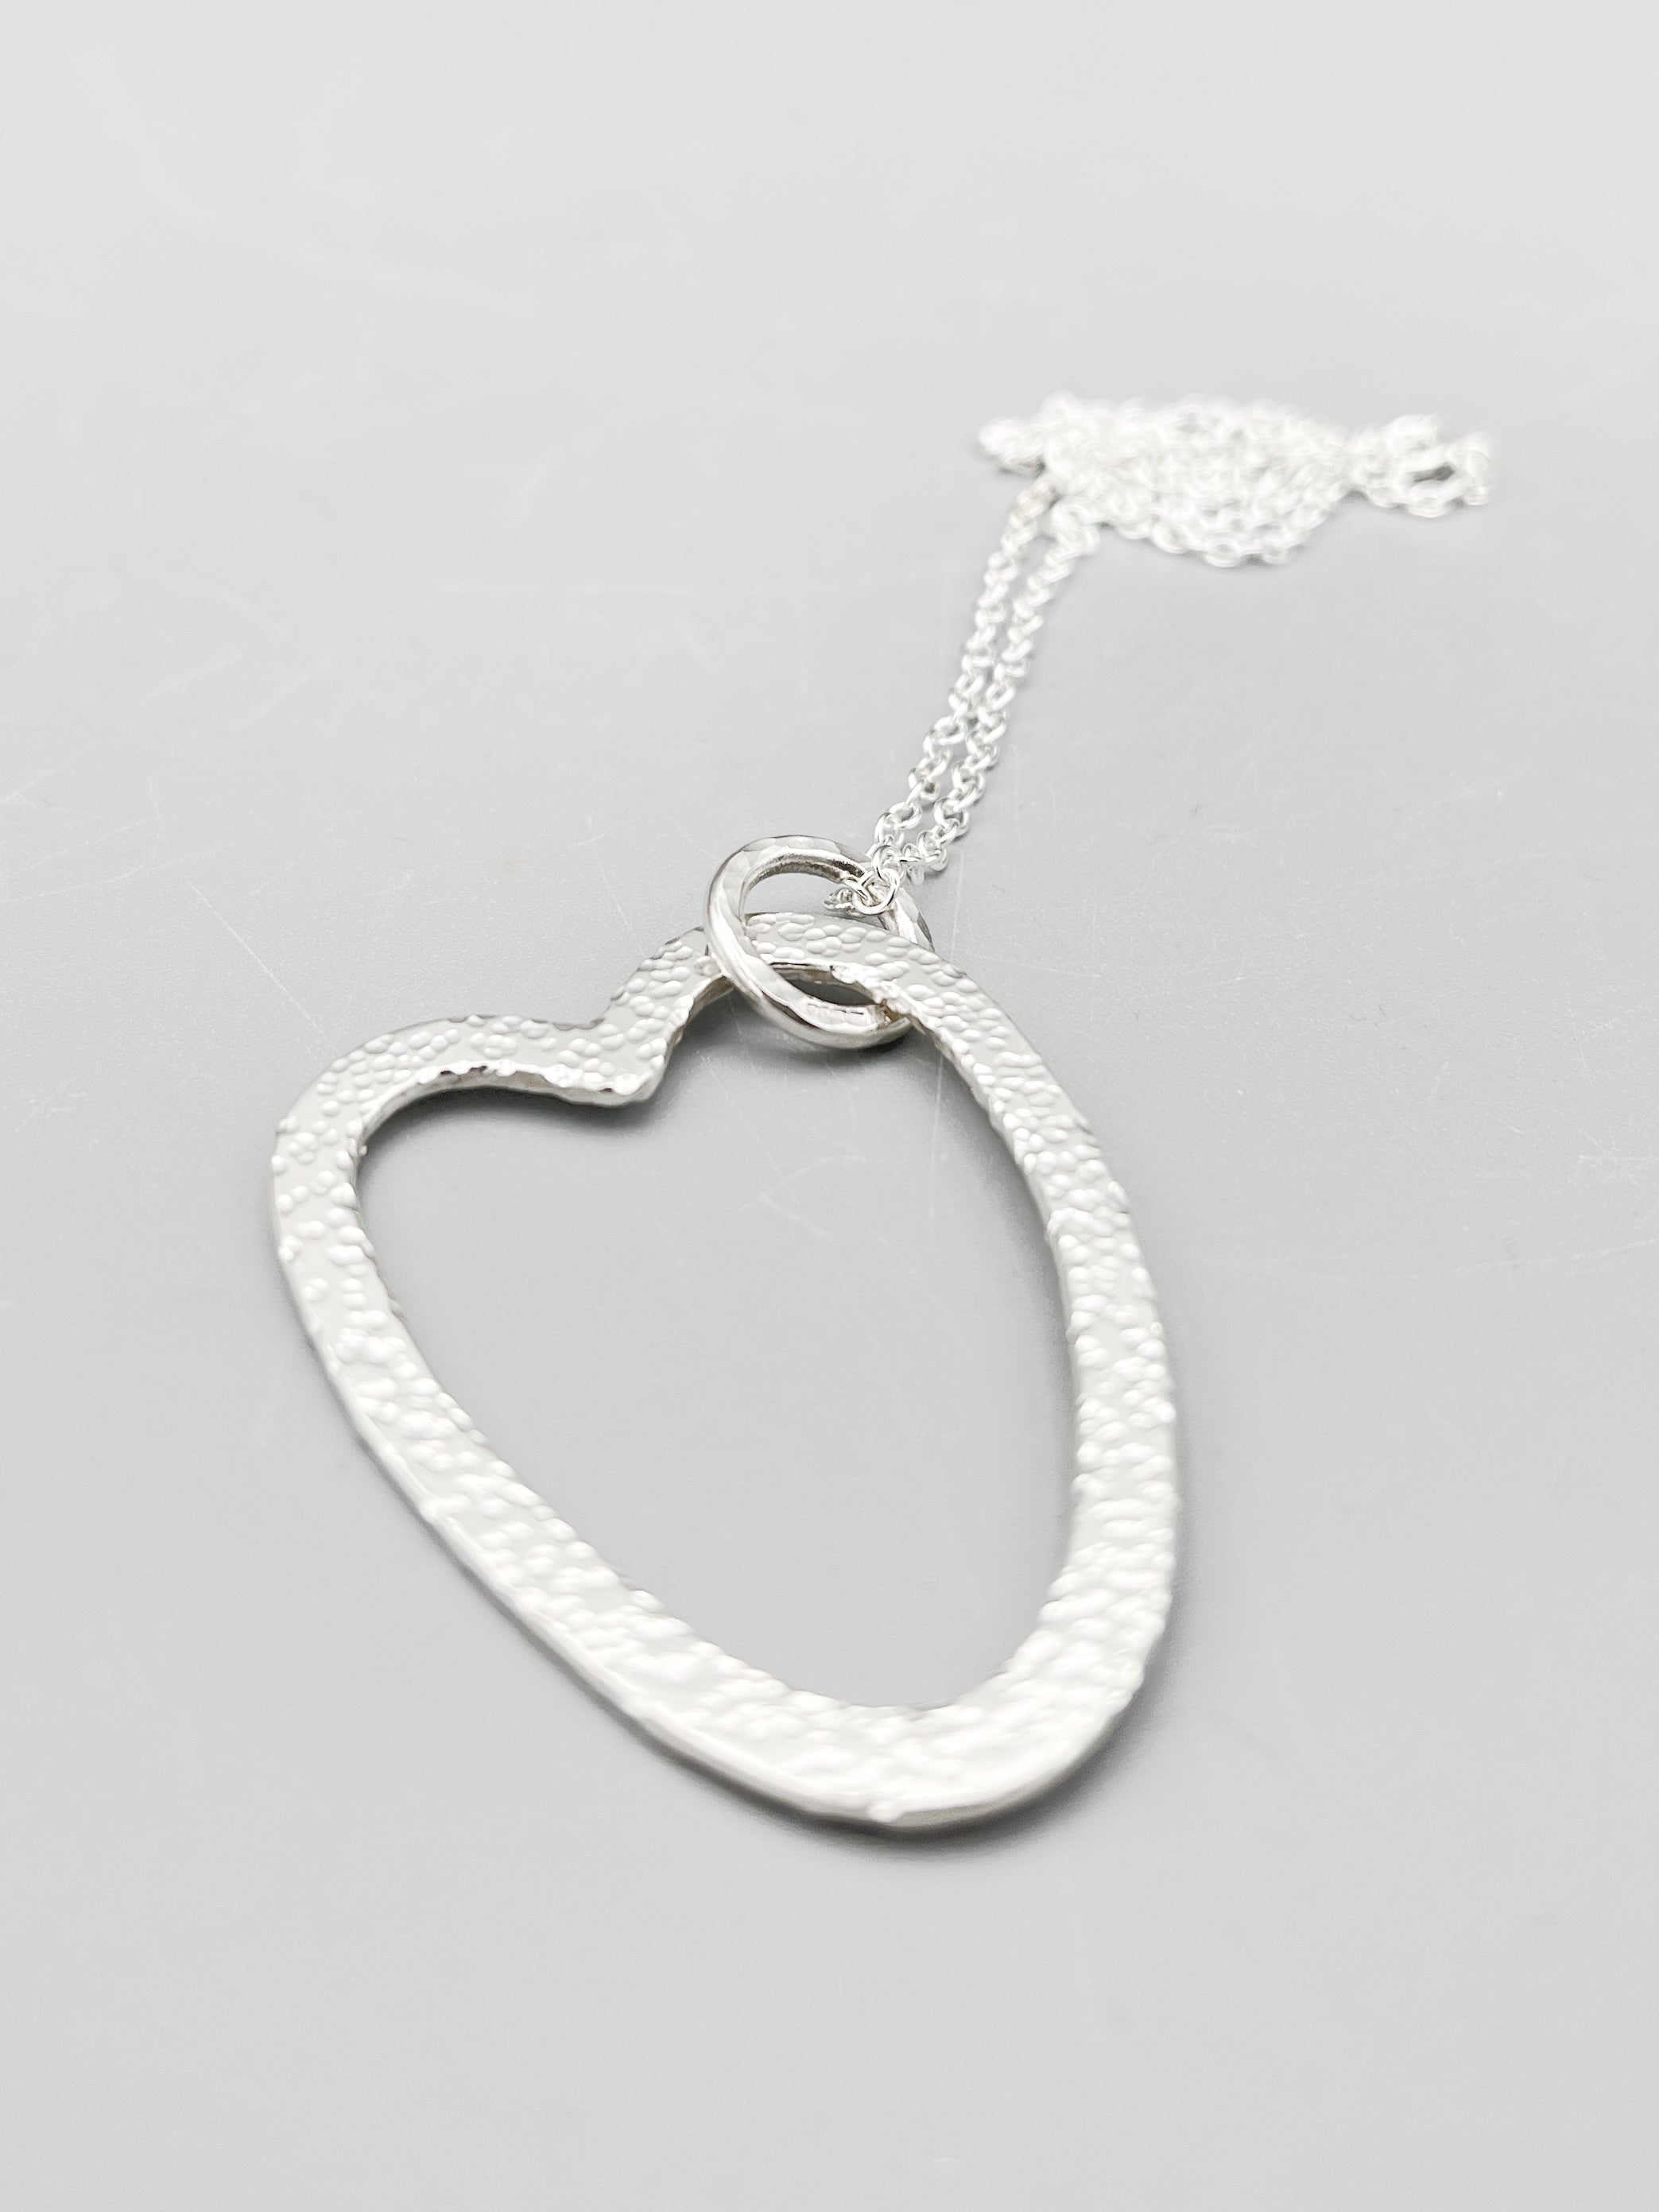 Sterling Silver large open heart pendant, hammered finish on 16" chain